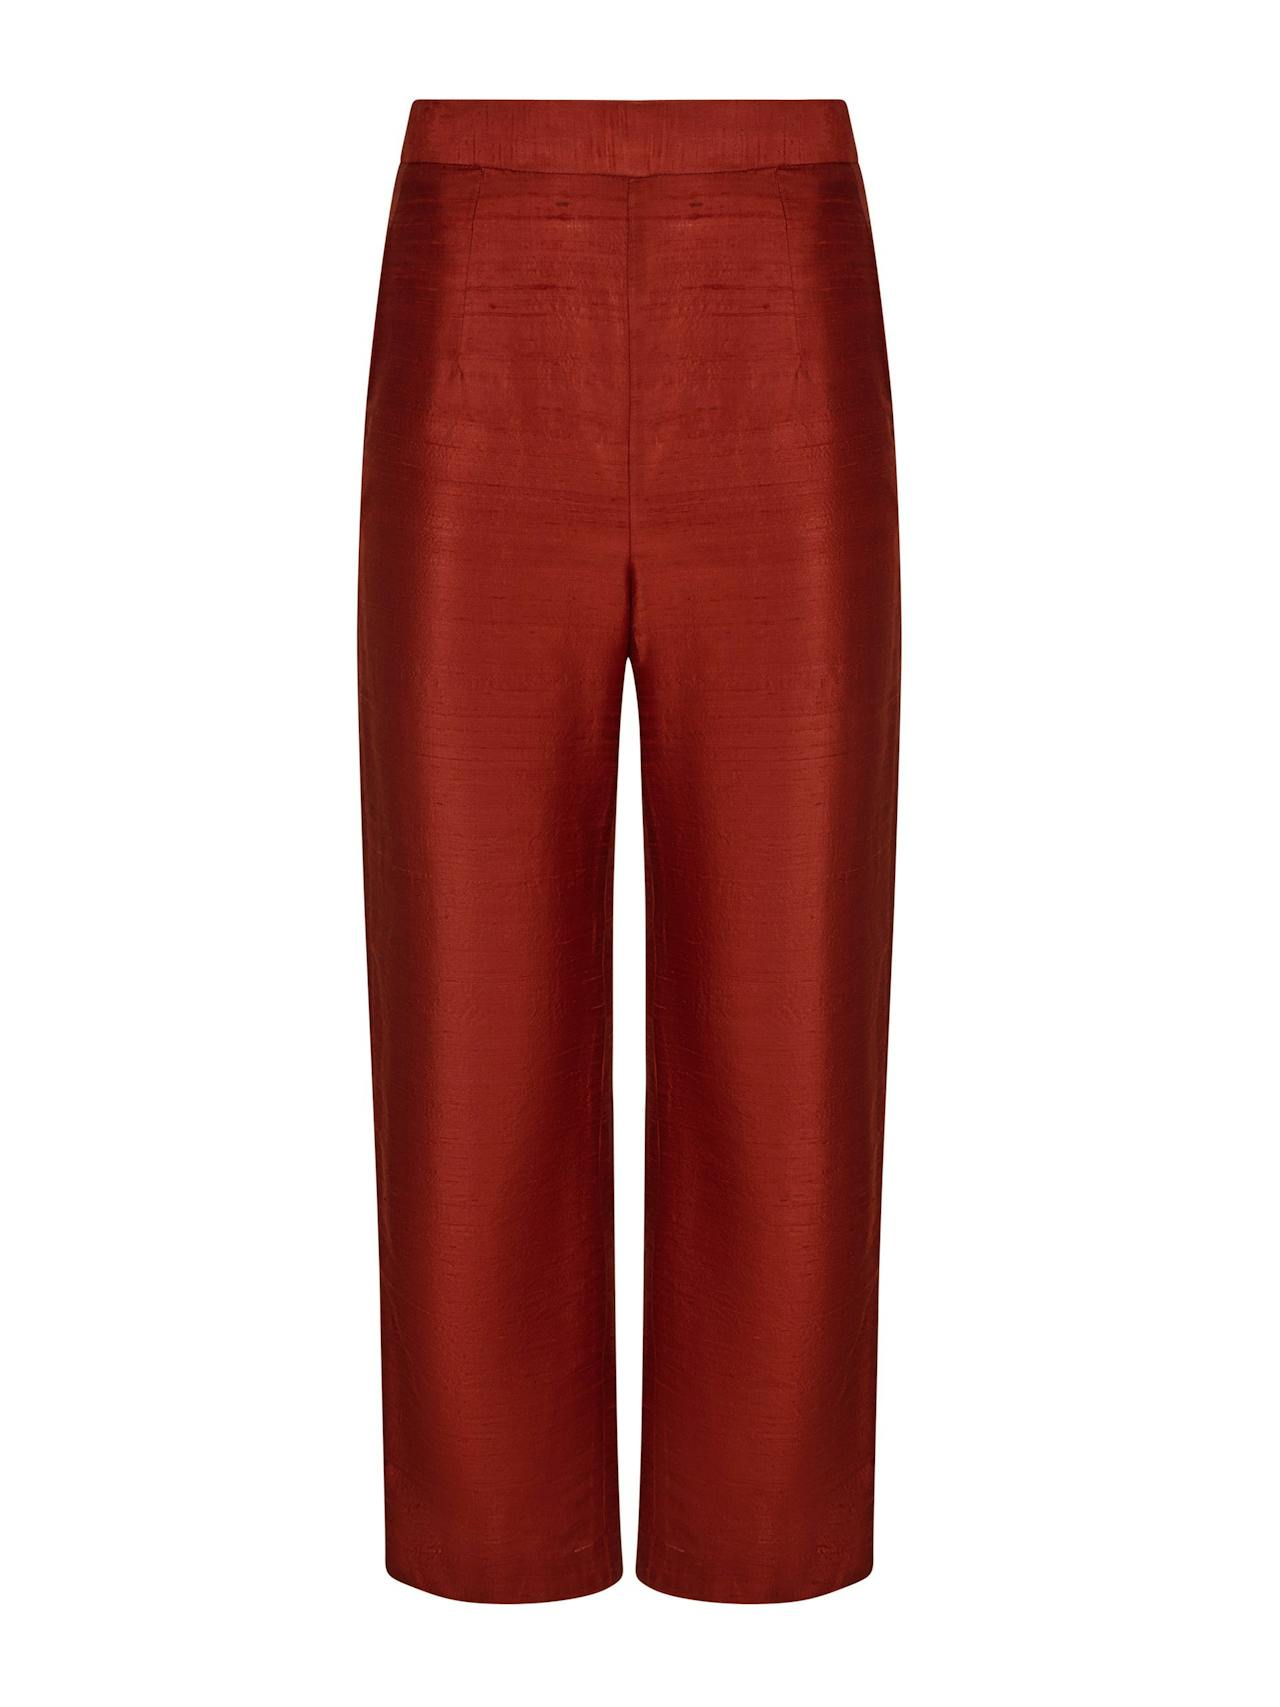 Red mulberry silk cropped trousers